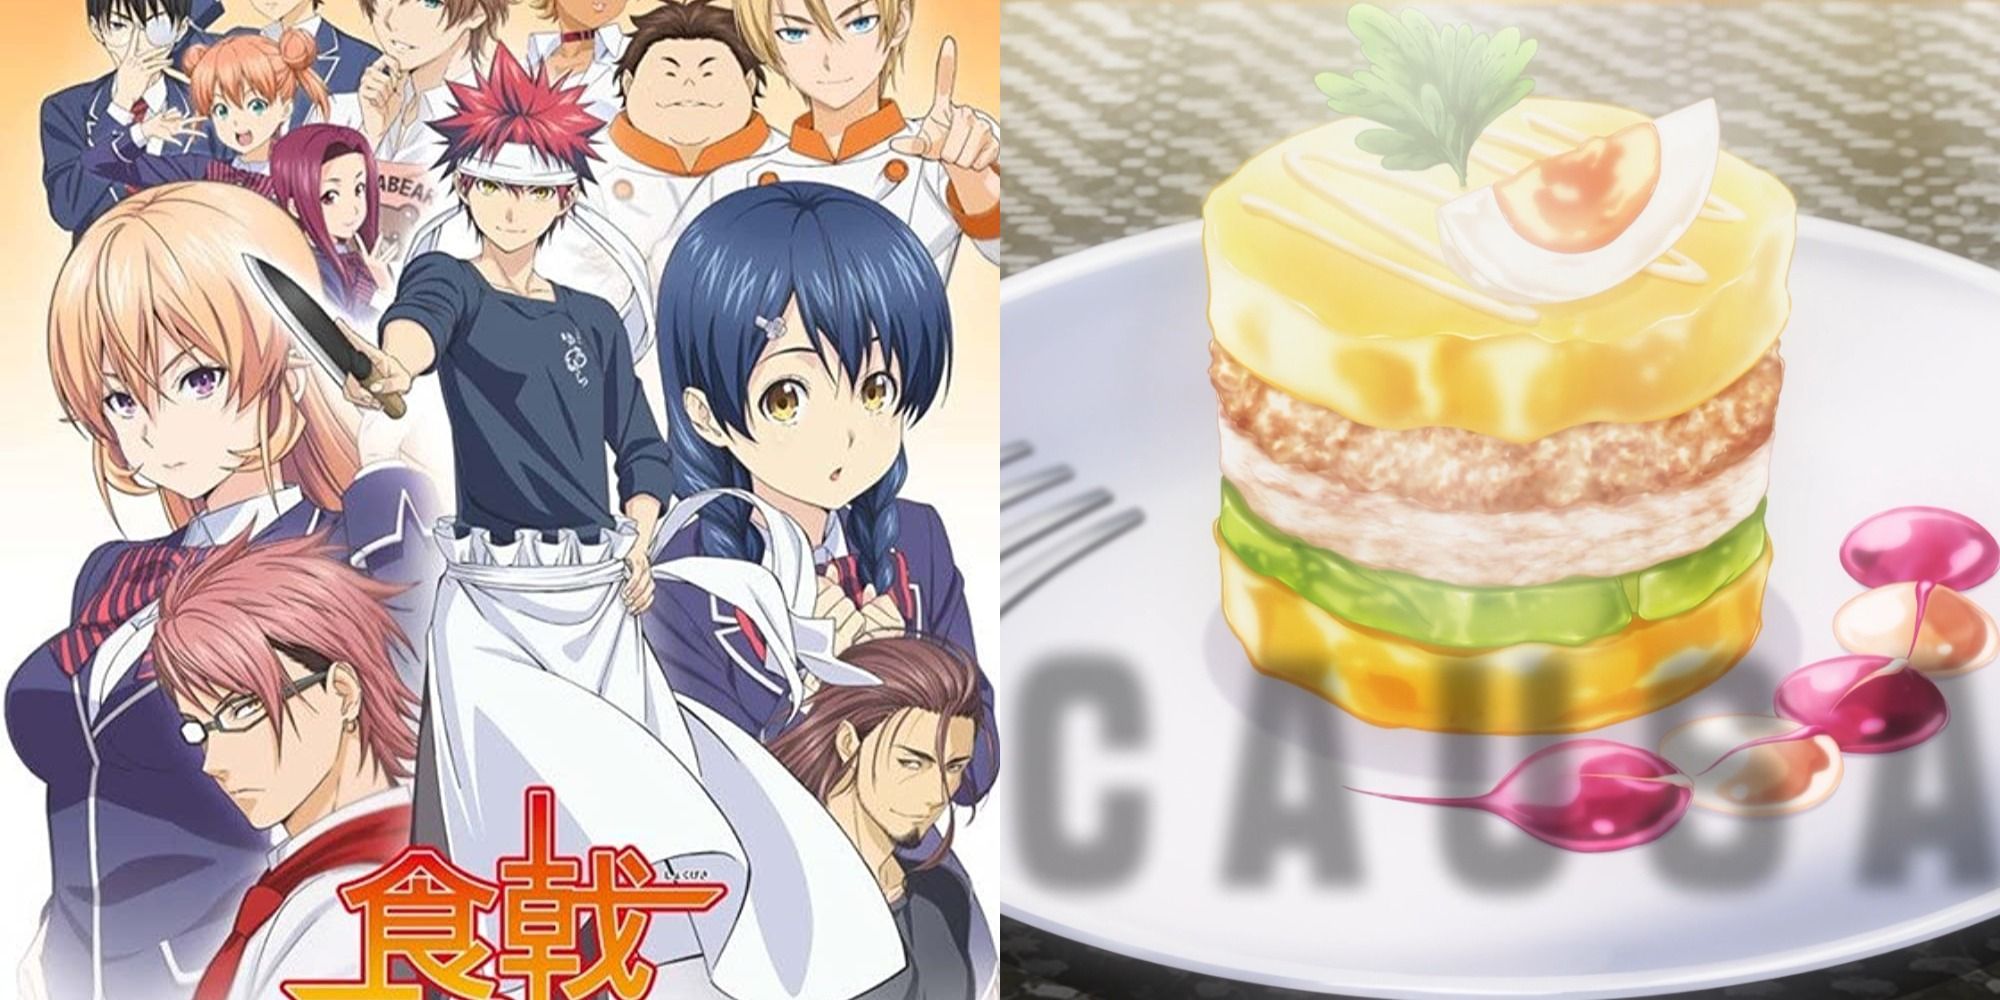 Split image showing the main characters from Food Wars! and a dessert